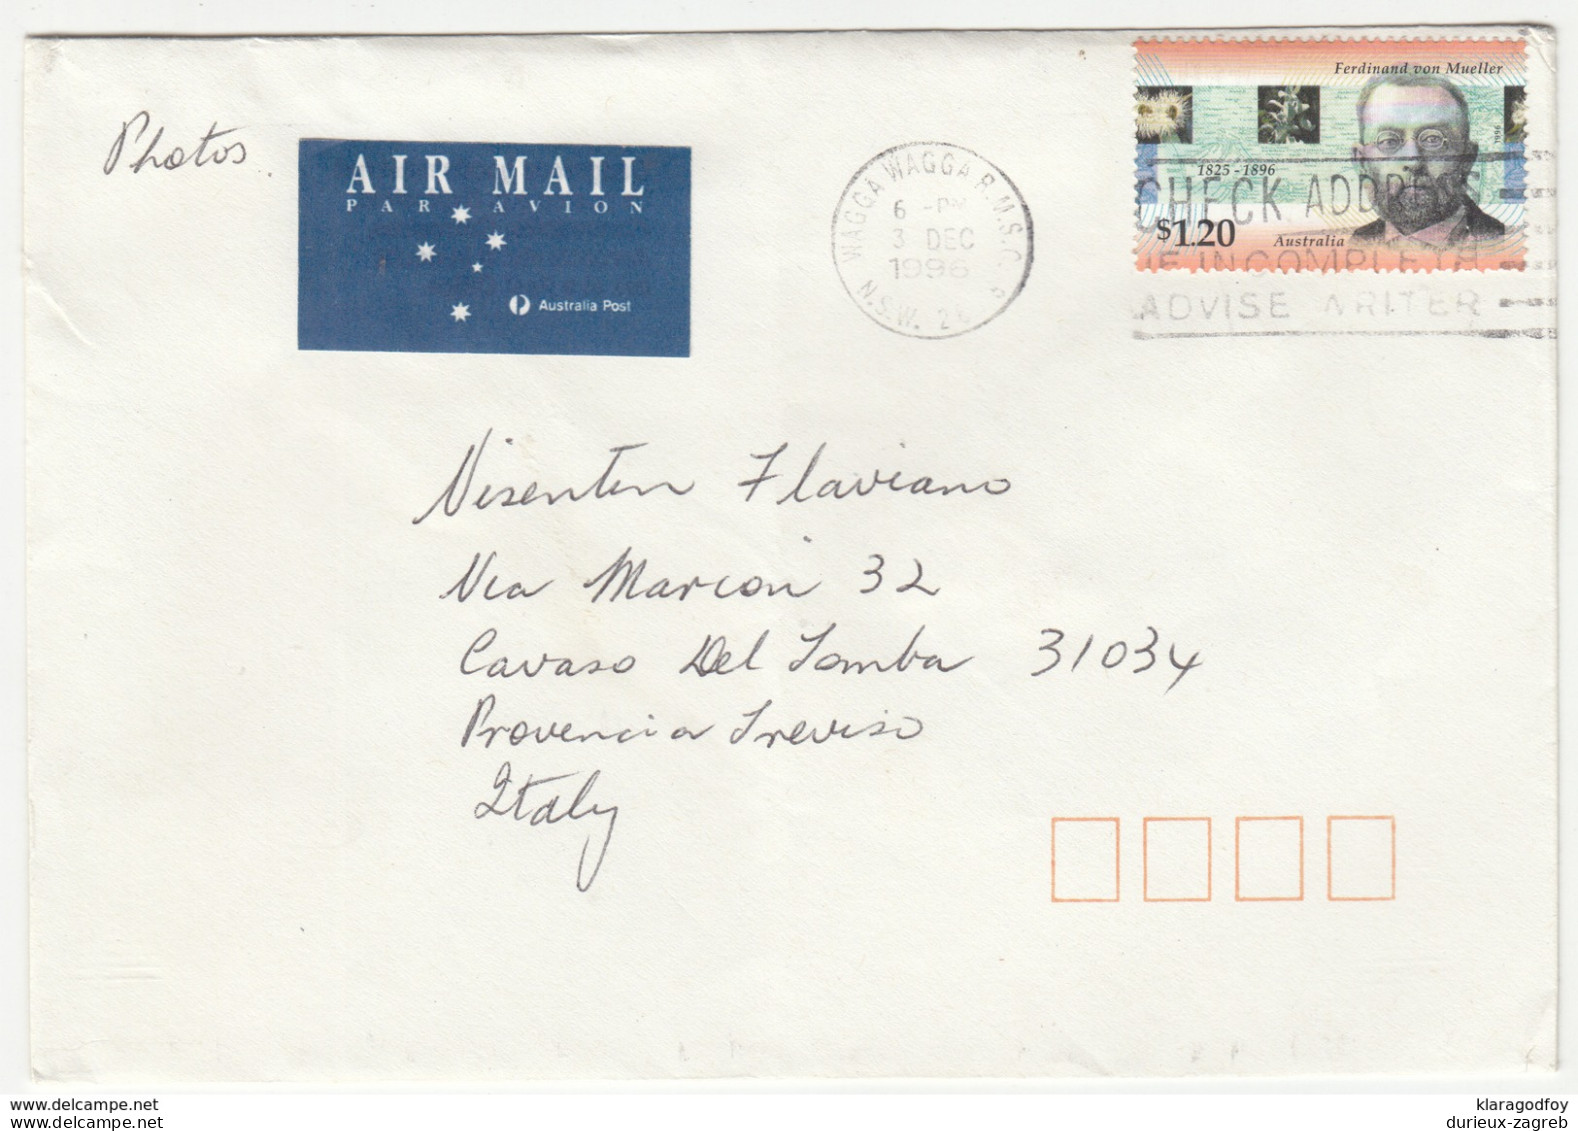 Australia, Airmail Letter Cover Travelled 1996 Wagga Wagga Pmk B171212 - Covers & Documents